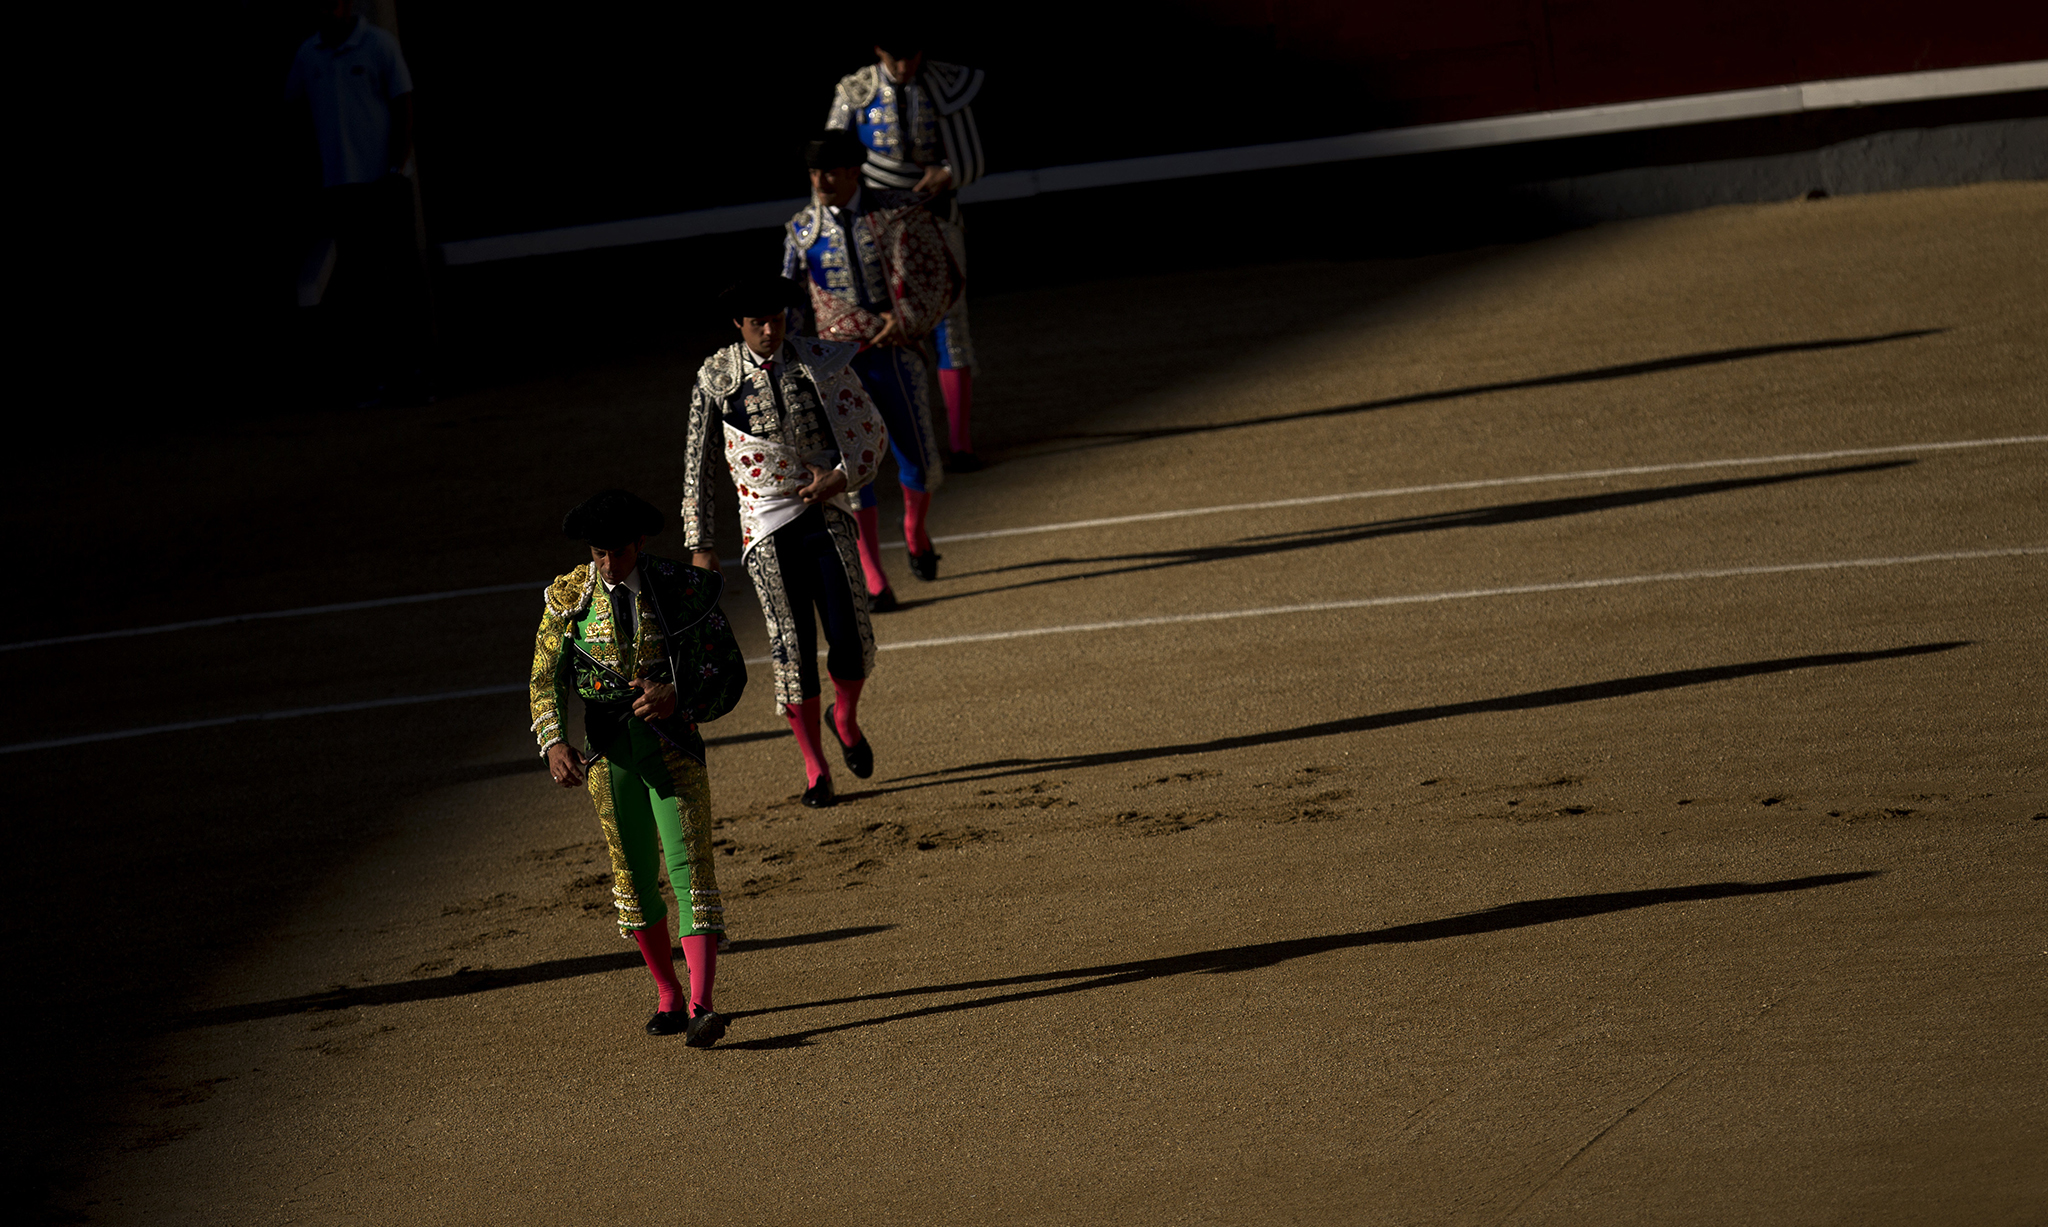 Bullfighters and assistants walk along the ring during the "paseillo" or ritual entrance to the arena prior a bullfight at the Las Ventas bullring in Madrid, Sunday, Aug. 7, 2016. (AP Photo/Francisco Seco)